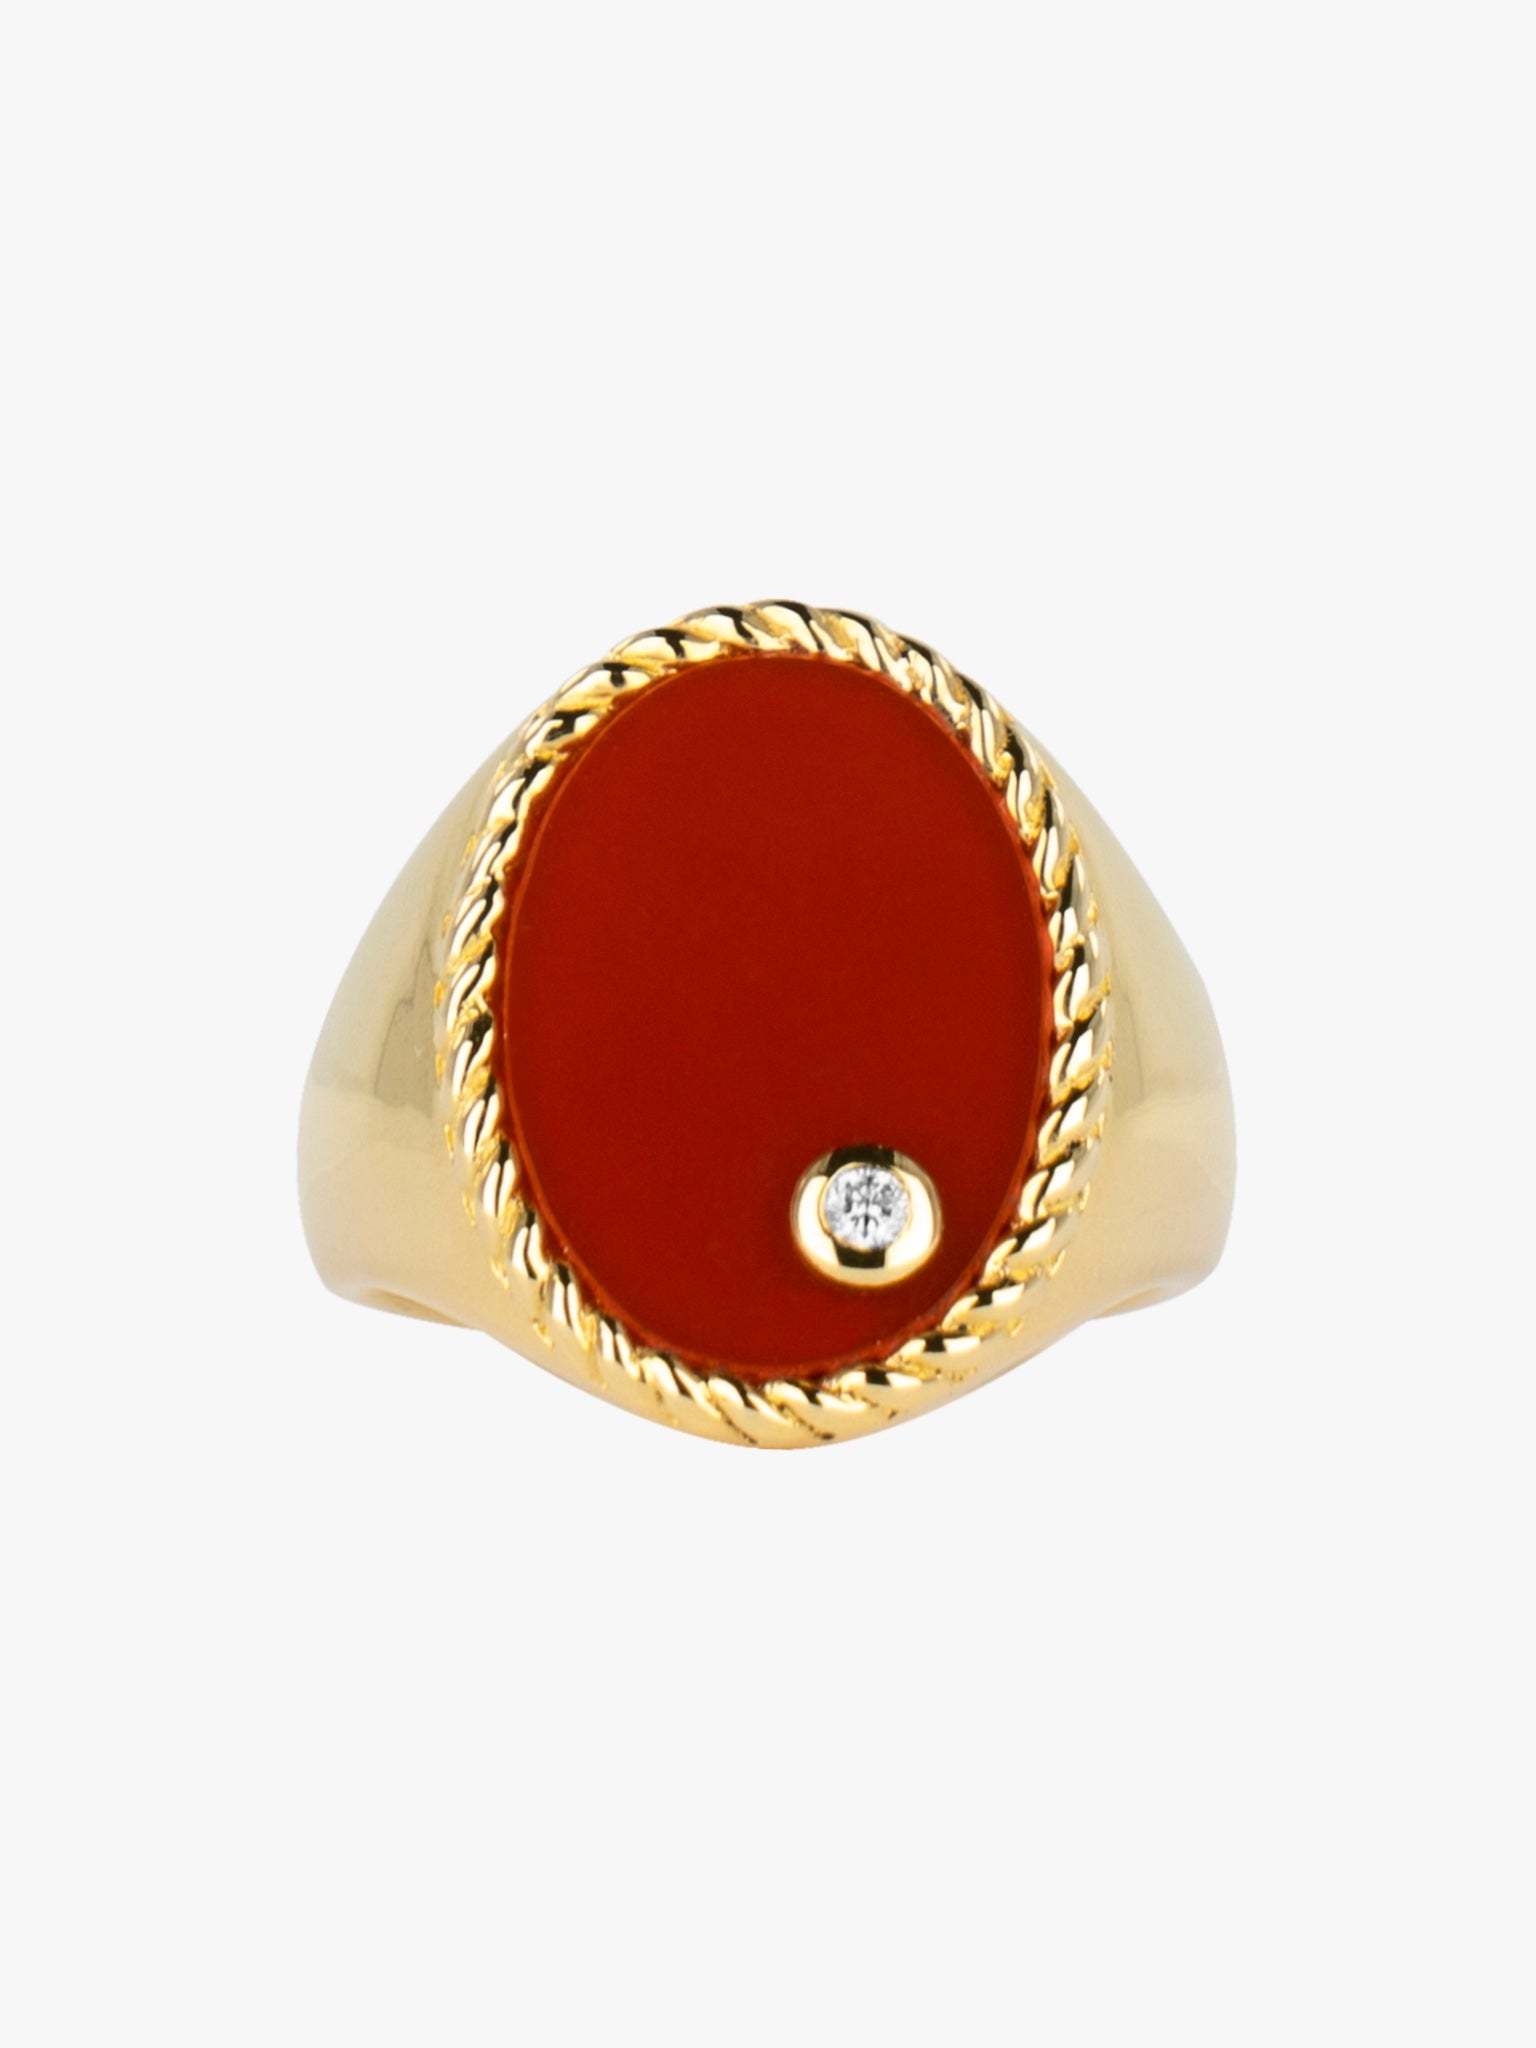 Diamond, agate and gold oval signet ring